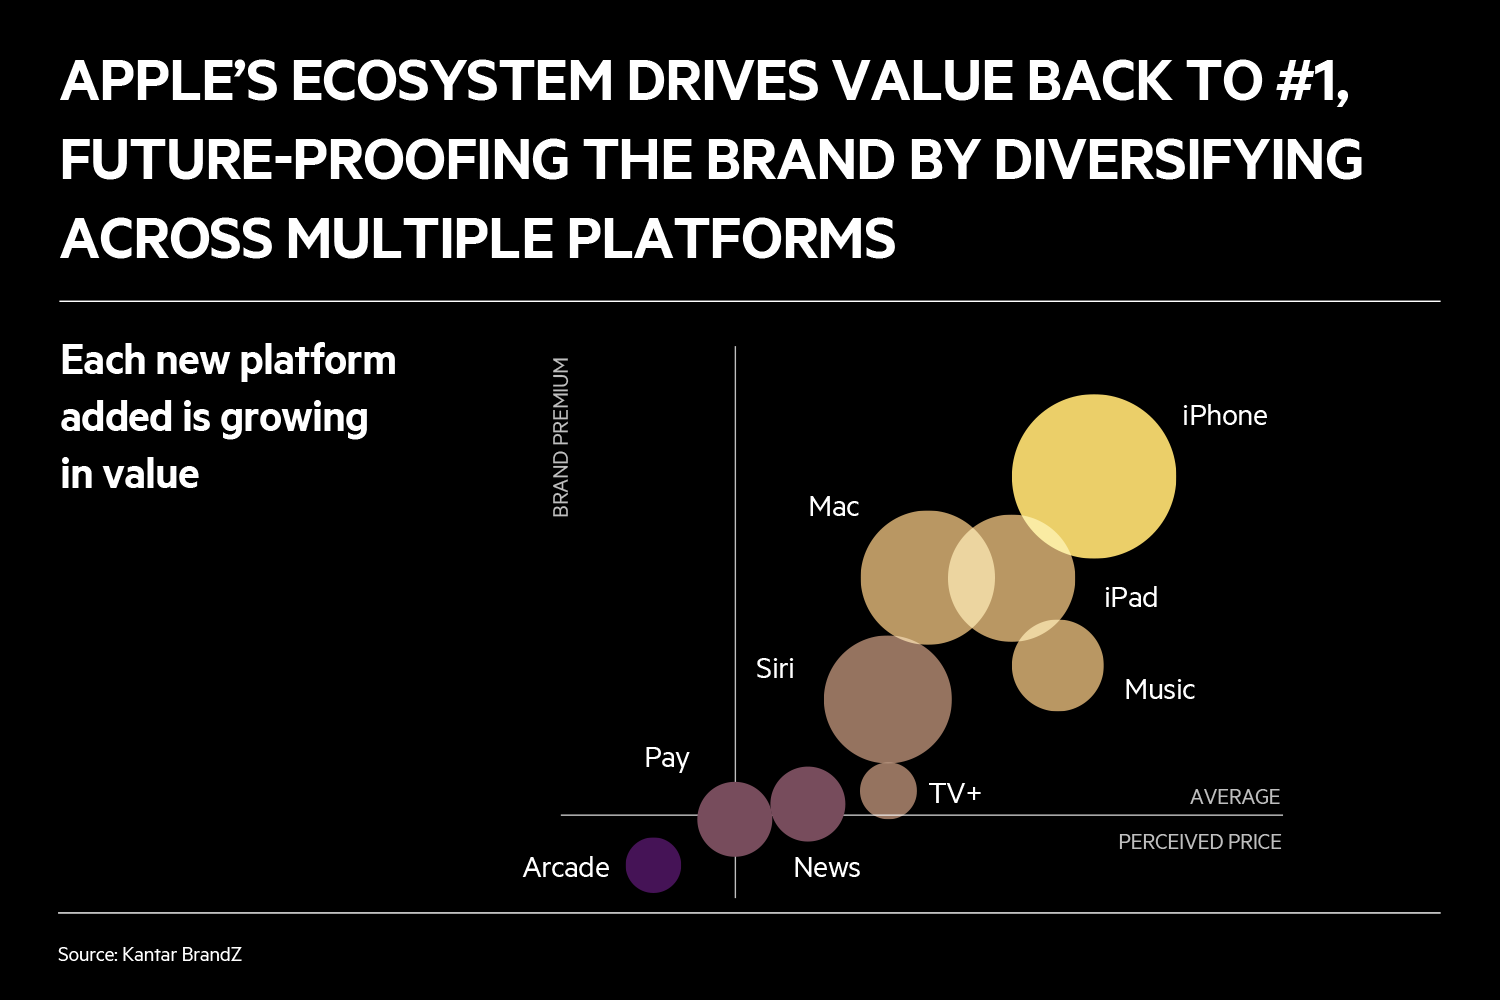 APPLE’S ECOSYSTEM DRIVES VALUE BACK TO #1, FUTURE-PROOFING THE BRAND BY DIVERSIFYING ACROSS MULTIPLE PLATFORMS